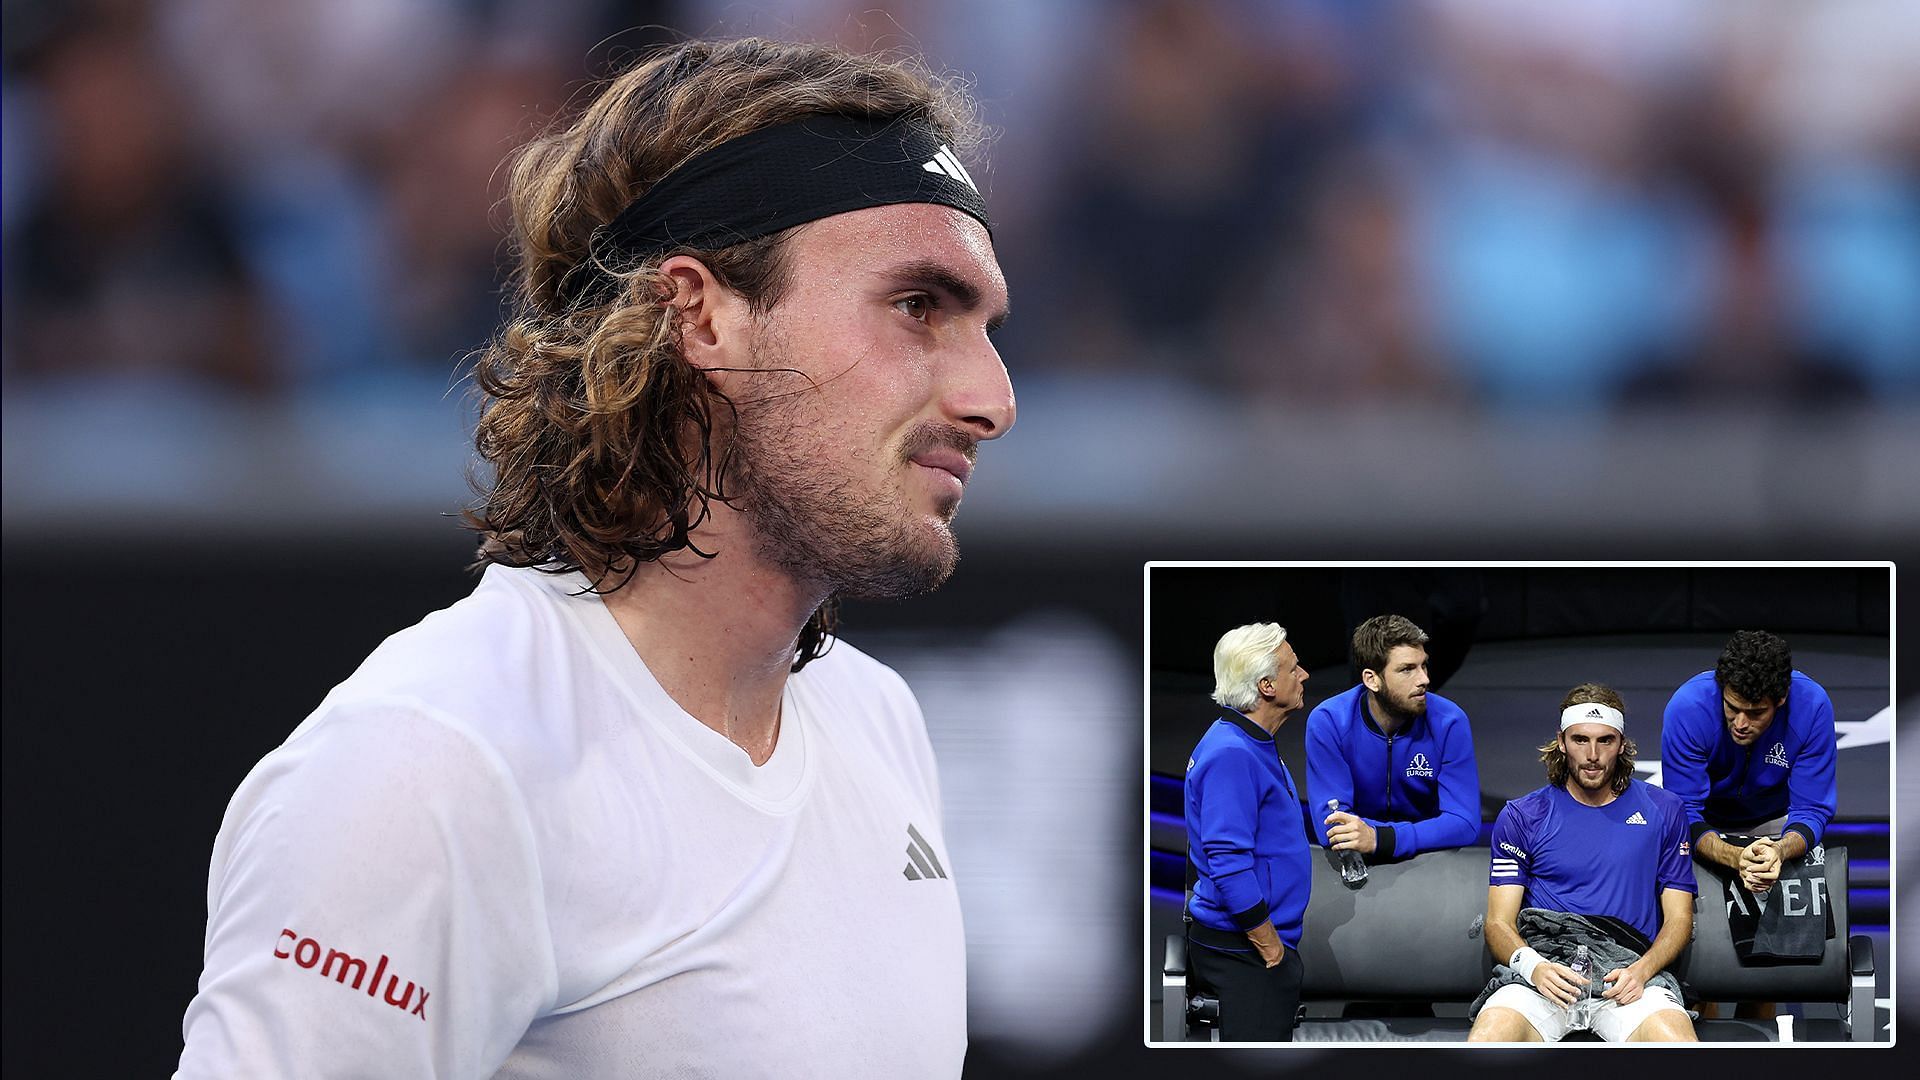 Stefanos Tsitsipas wants to make friends on the ATP tour.